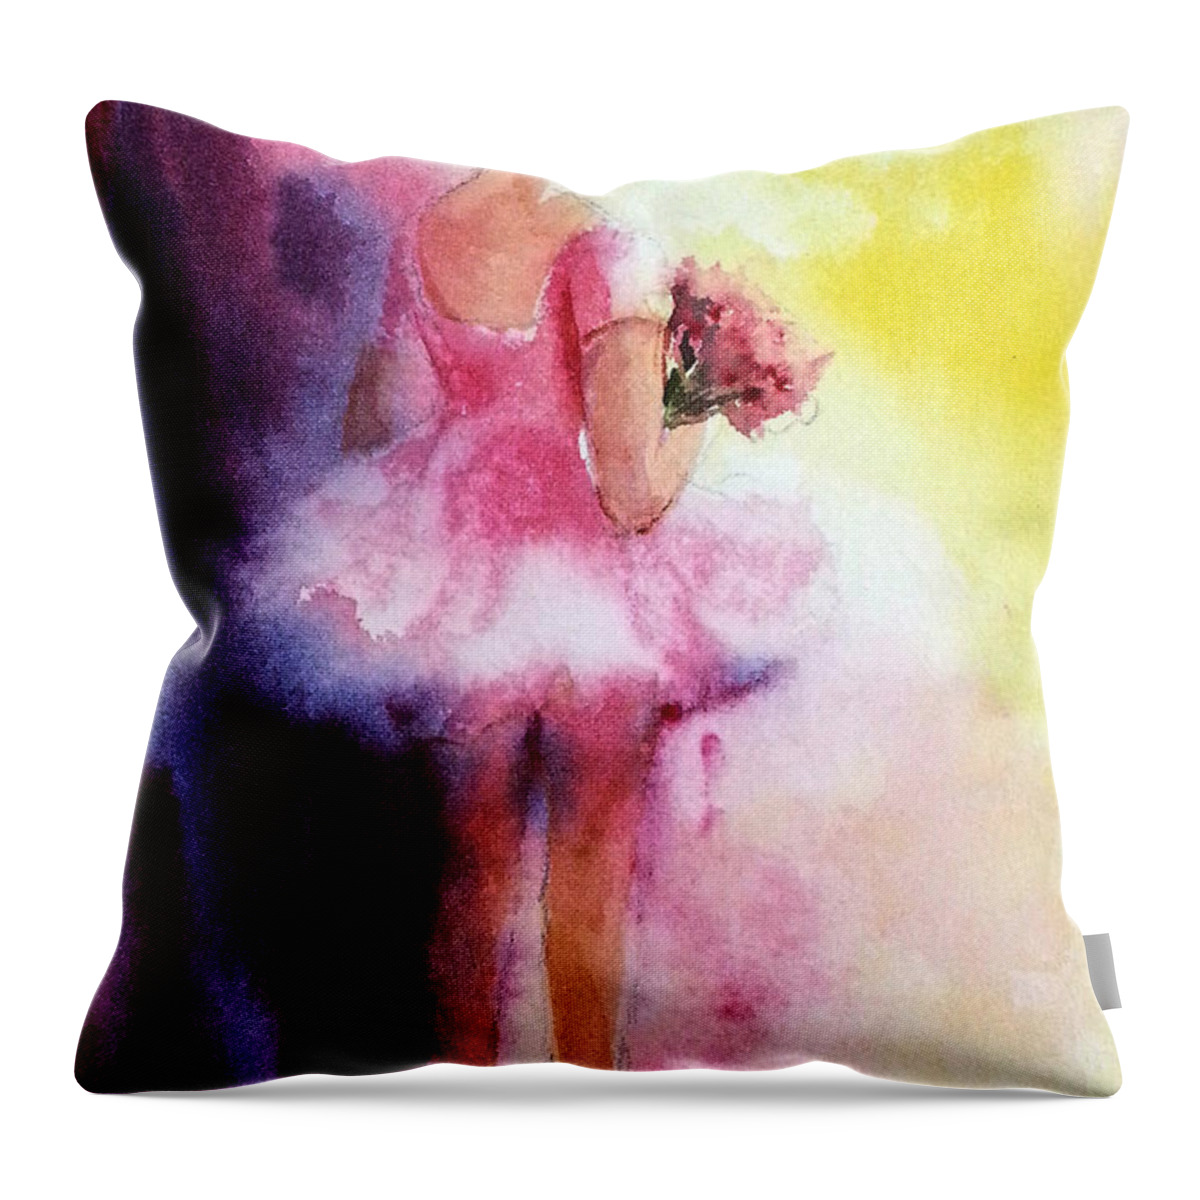 Ballerina Throw Pillow featuring the painting Her first dance by Asha Sudhaker Shenoy